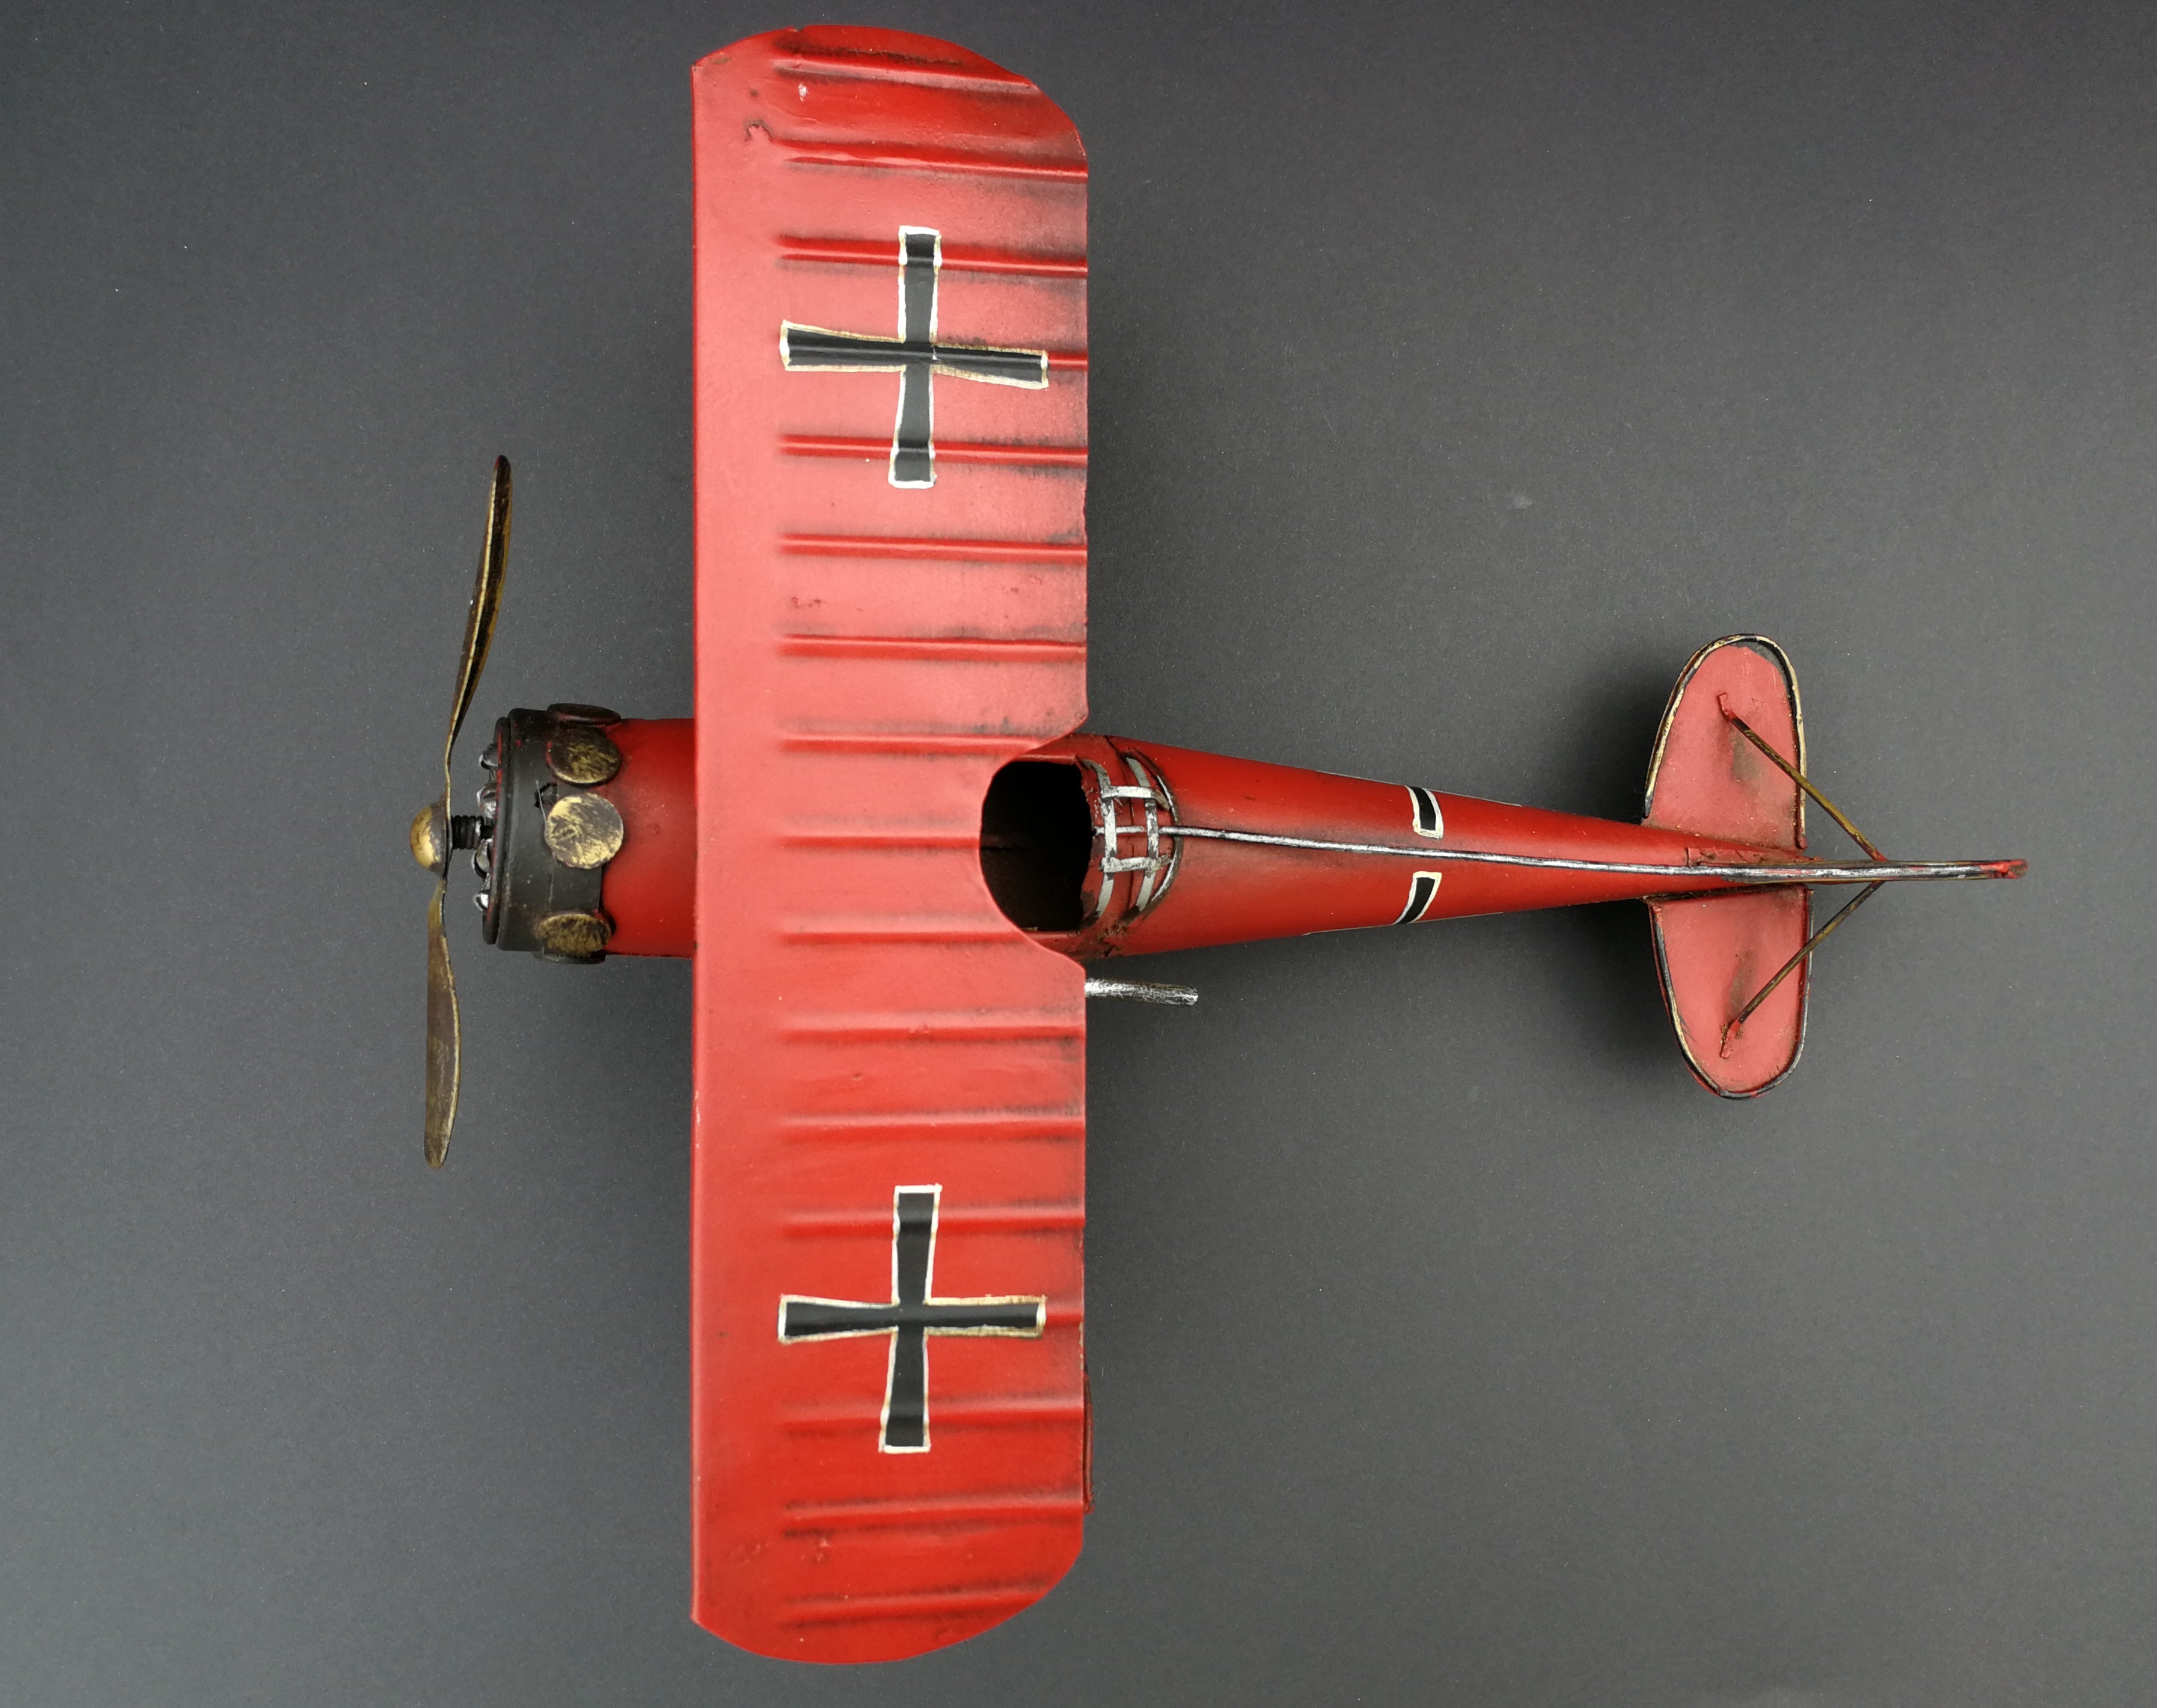 Tin aeroplane. Red and black. Hand made. View from top.